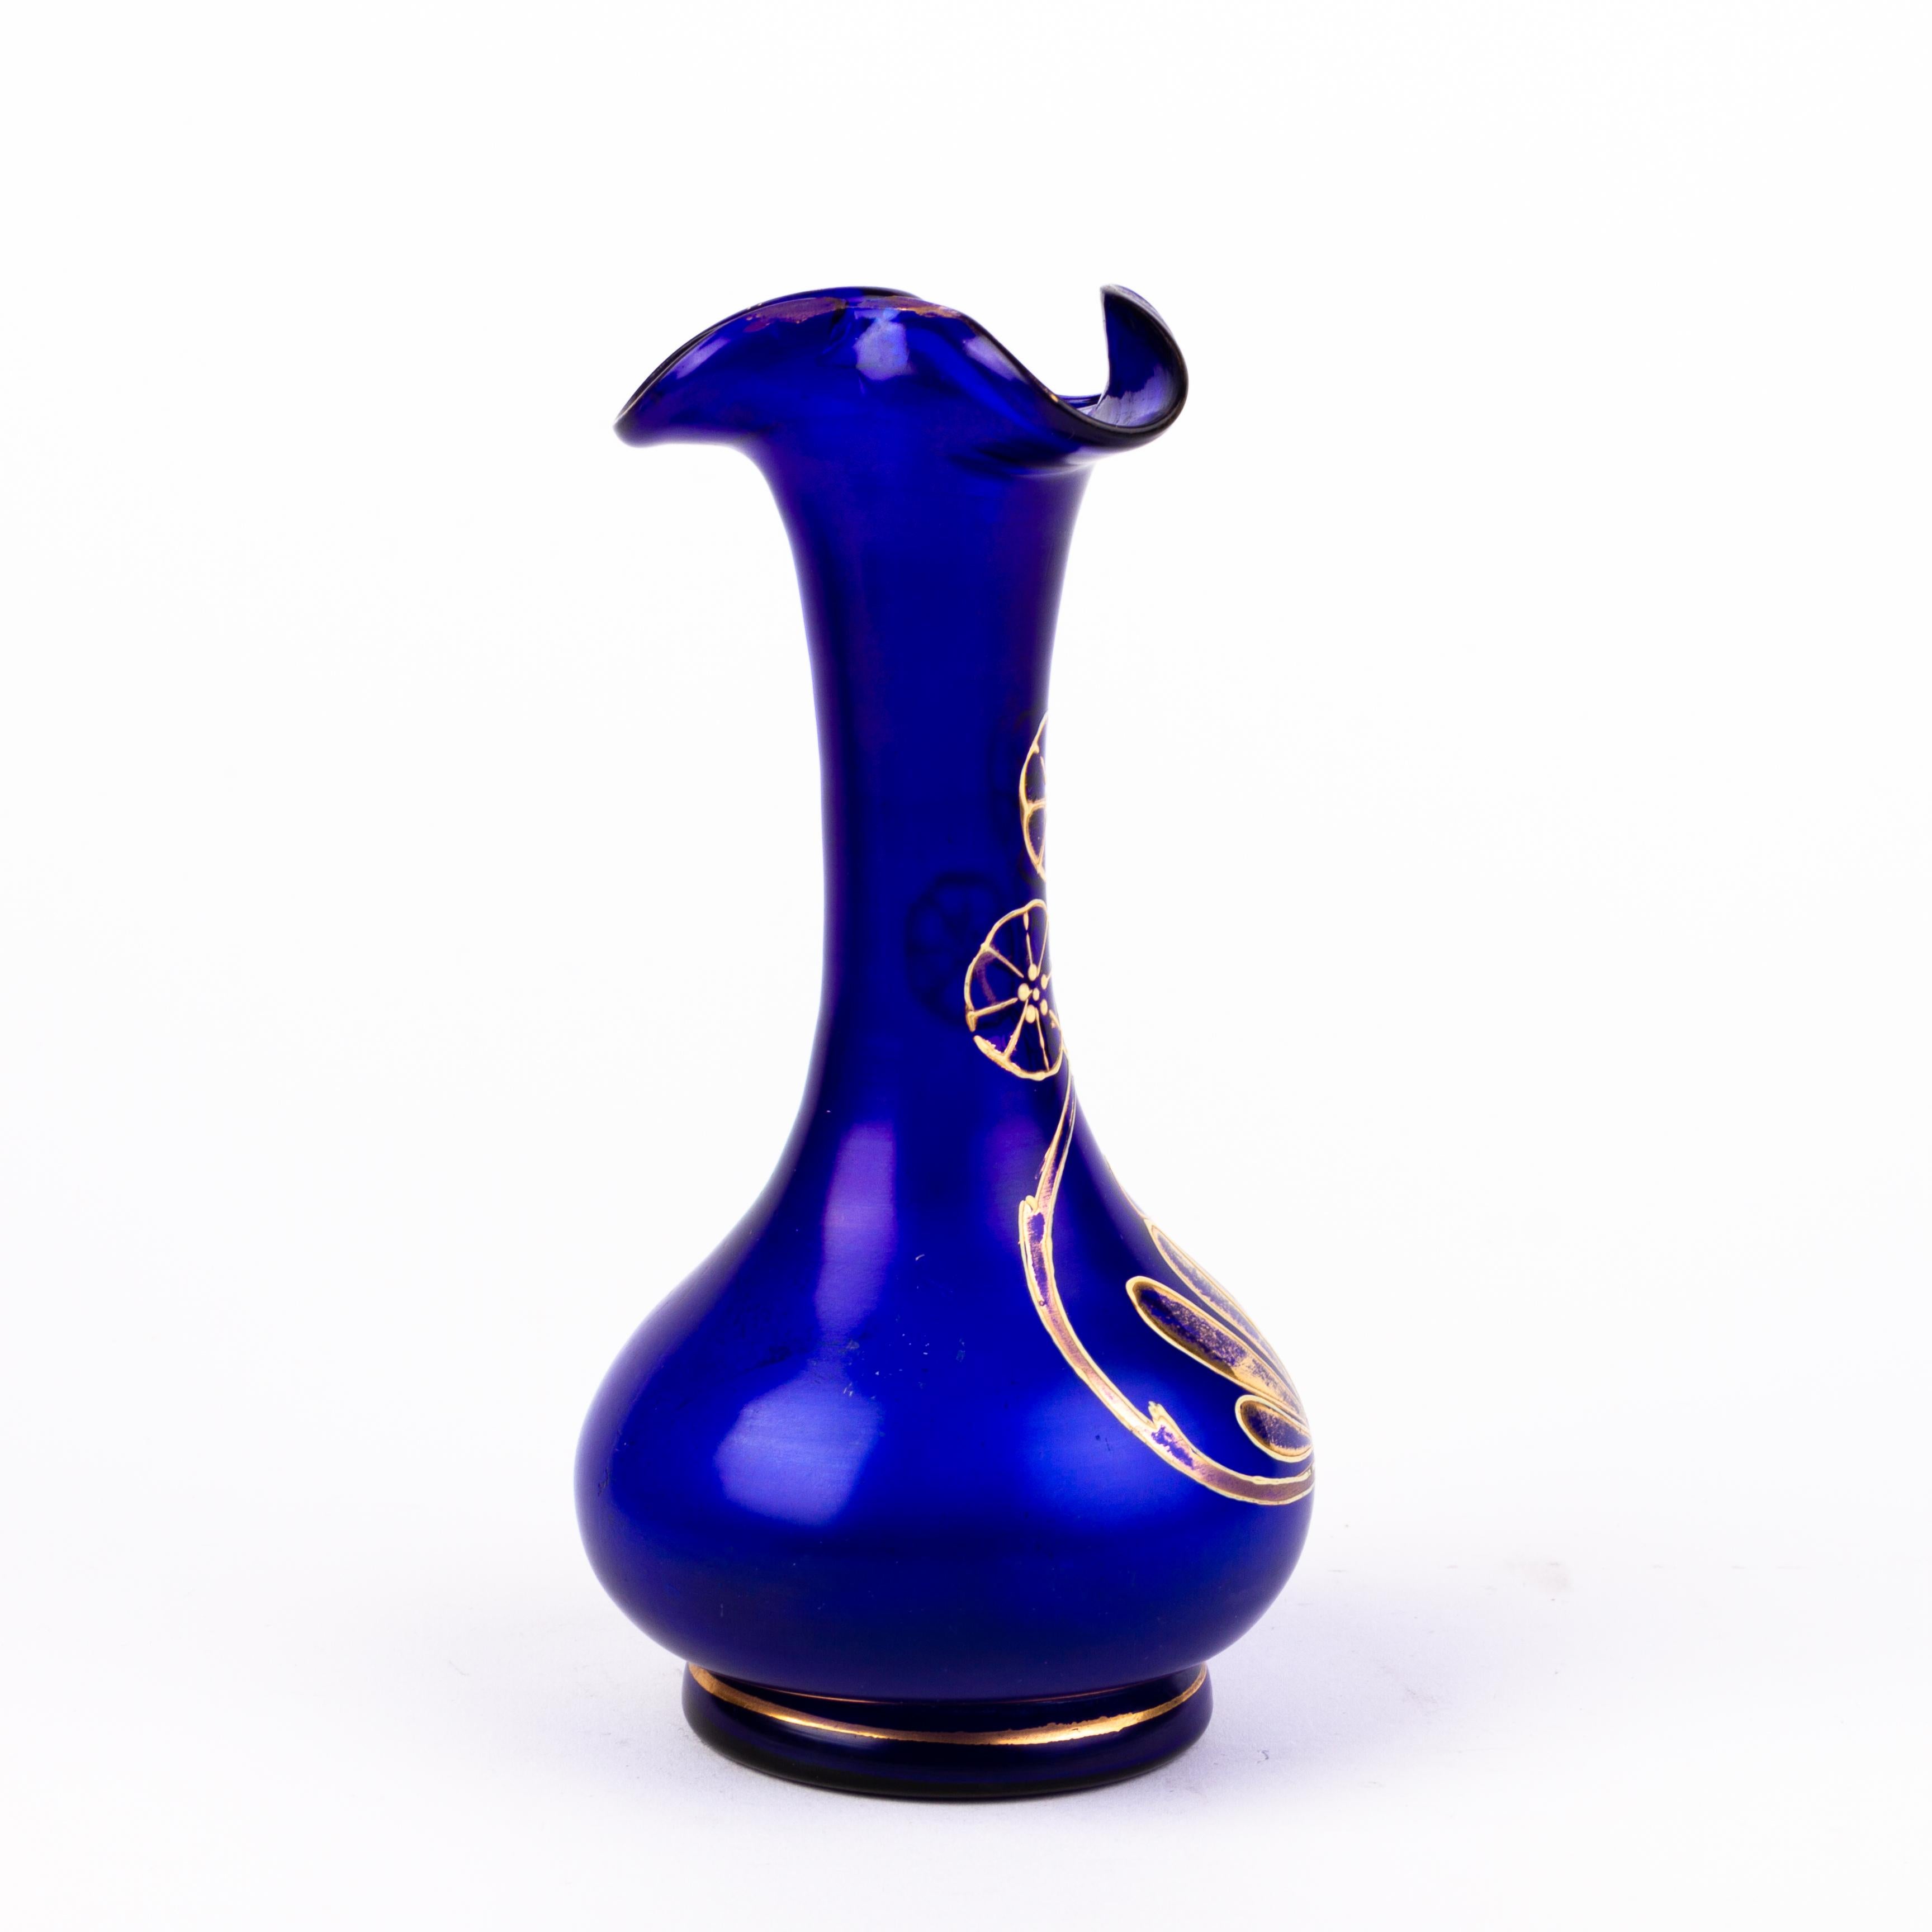 In good condition
From a private collection
Art Nouveau Bristol Blue Glass Vase 